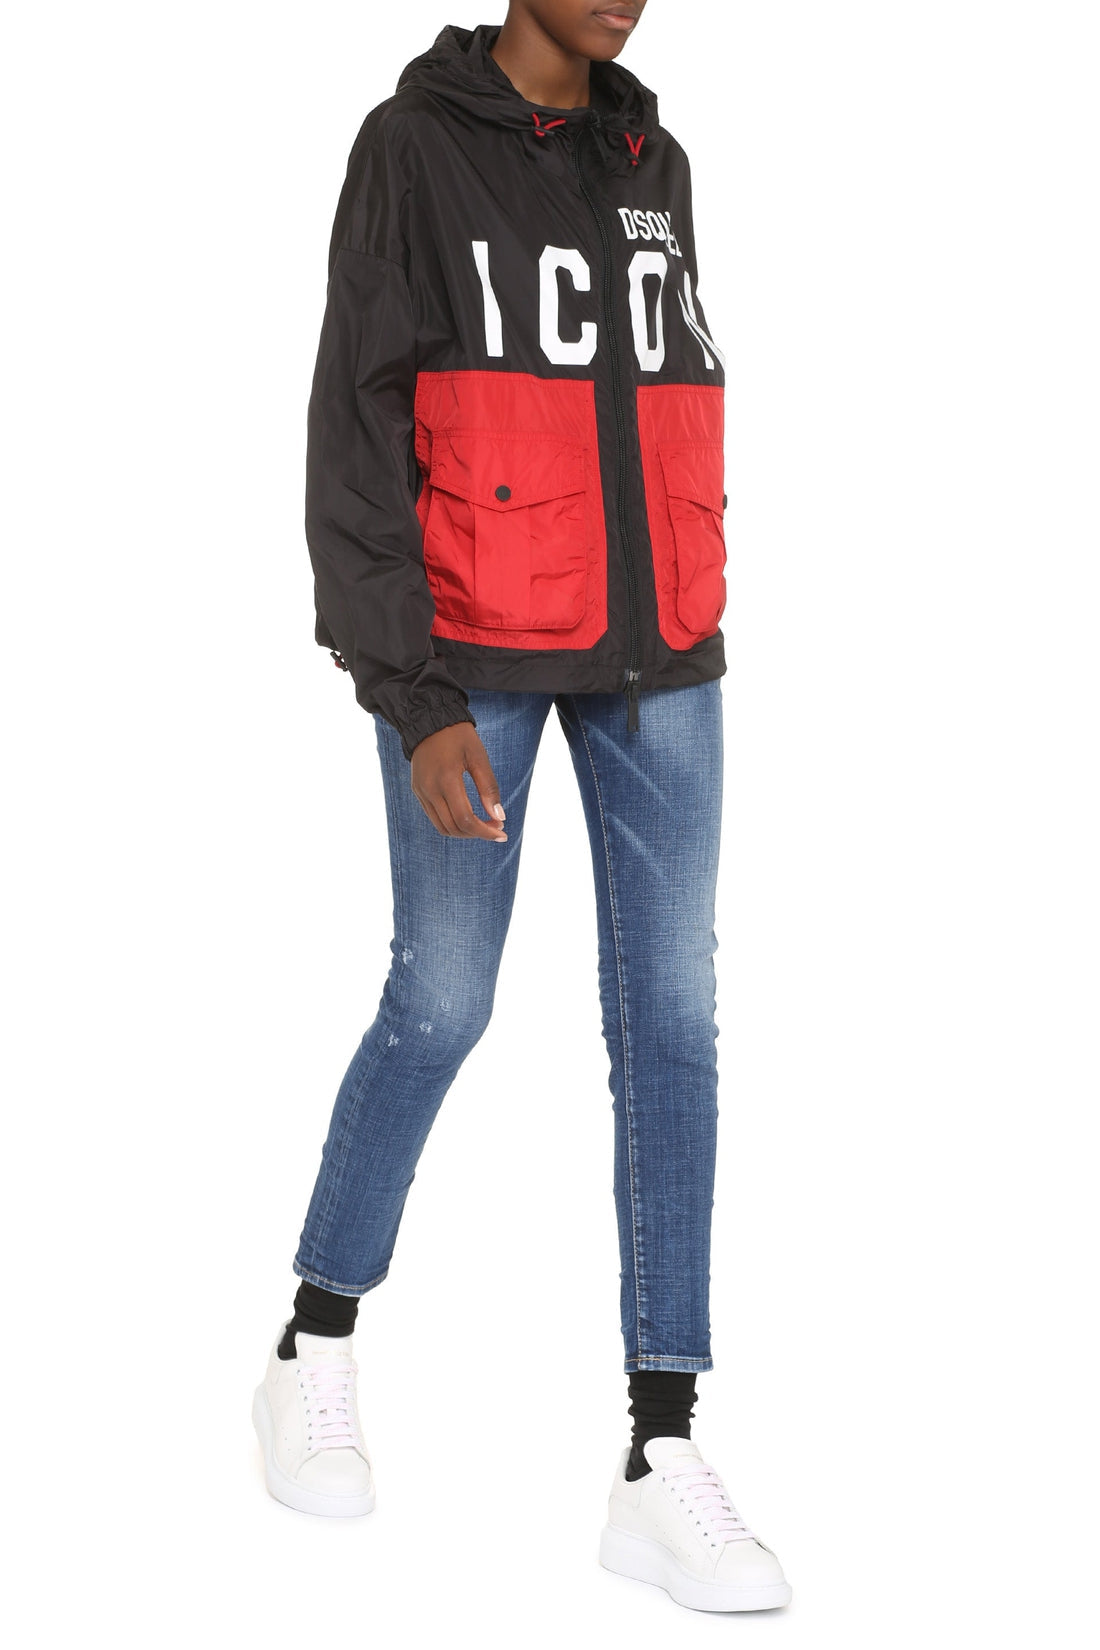 Dsquared2-OUTLET-SALE-Icon hooded windbreaker-ARCHIVIST